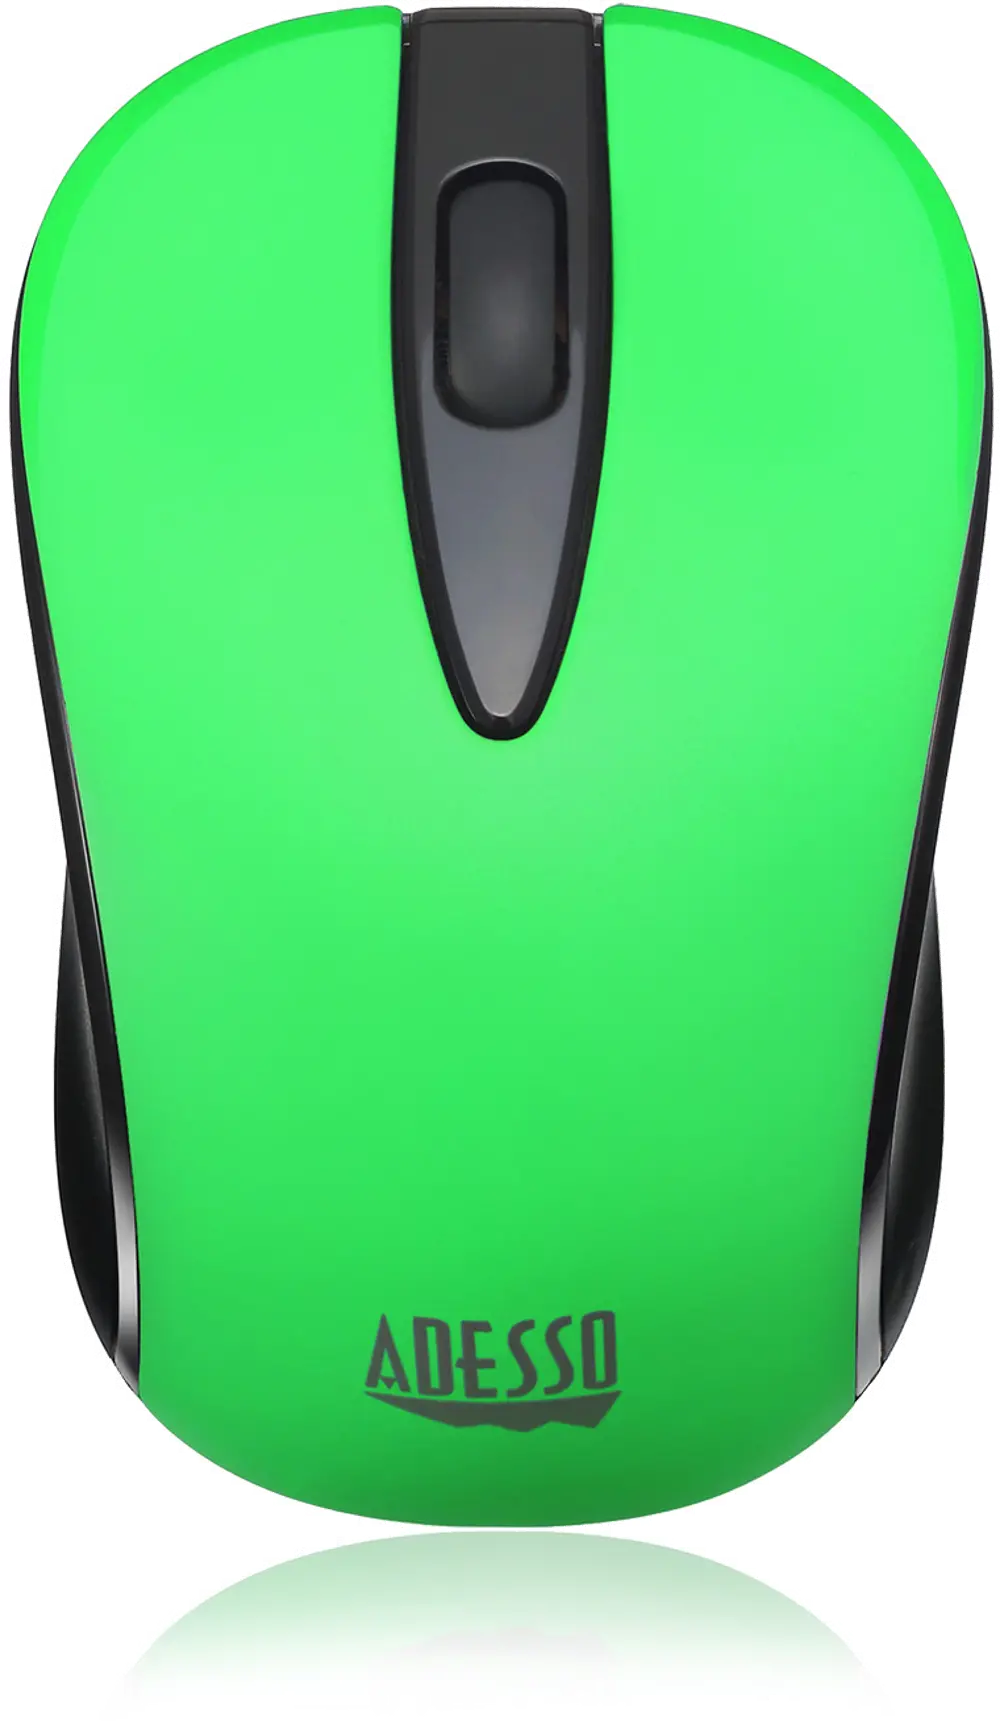 iMOUSE-S70 GREEN Adesso Optical Wireless Neon Green iMouse - S70-1